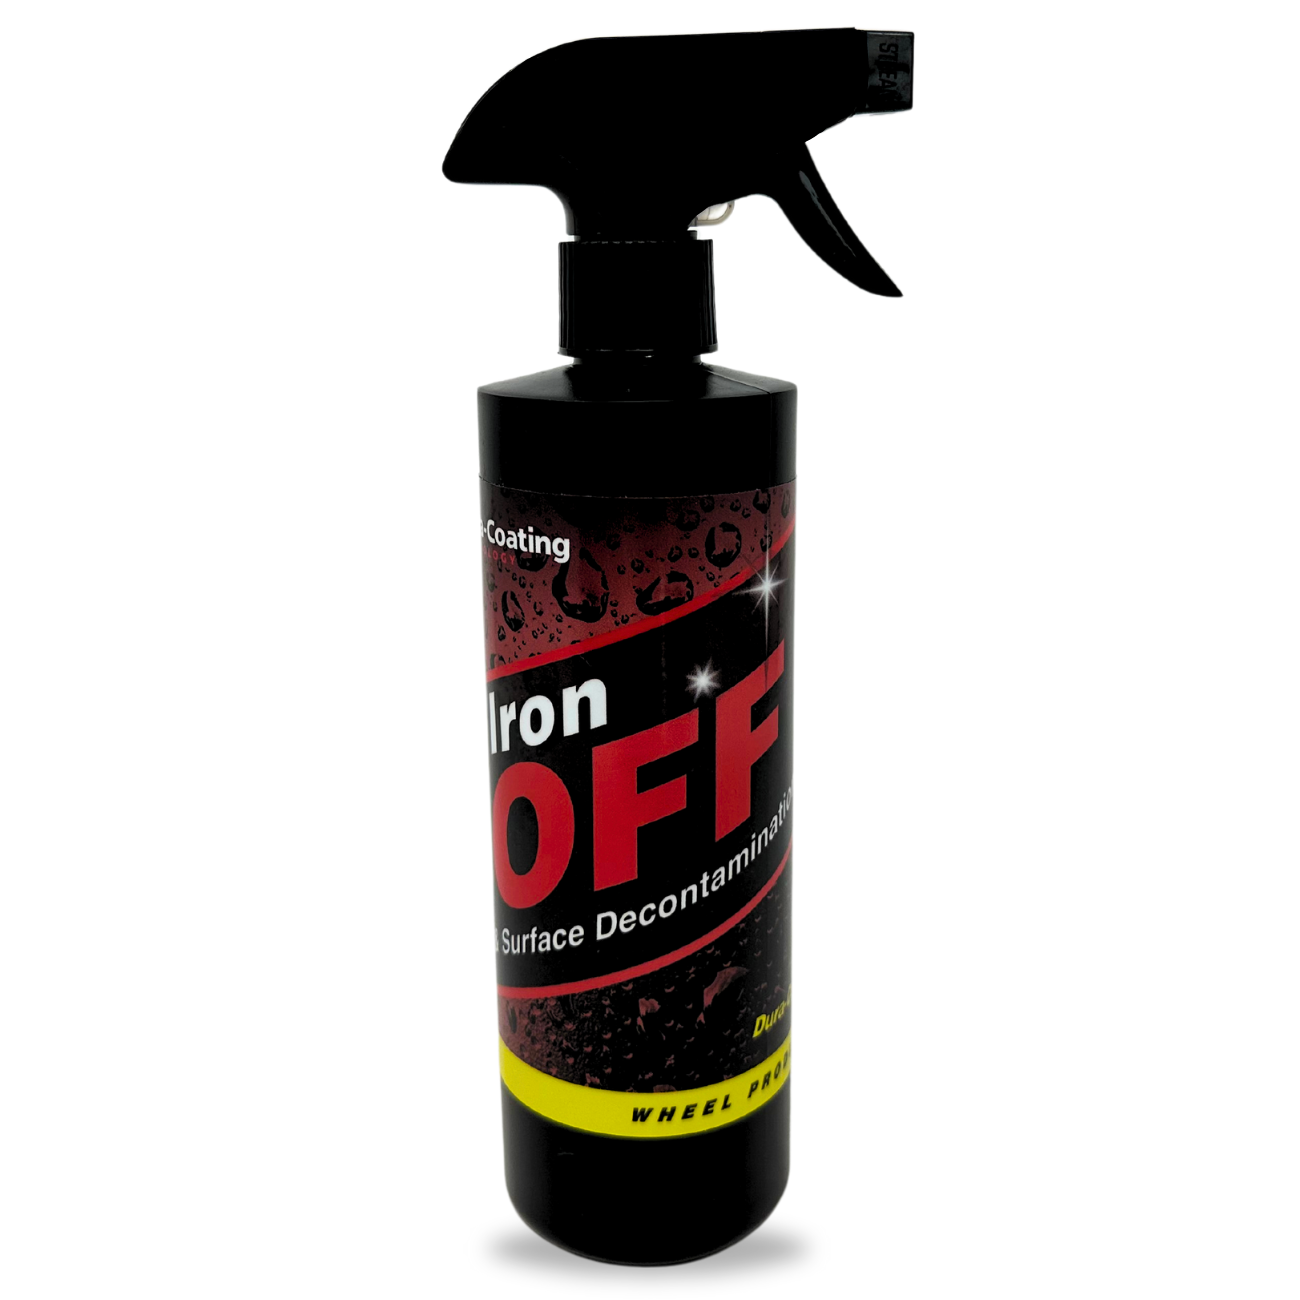 Iron Off - Professional Iron Remover and Wheel Cleaner · The Last Coat